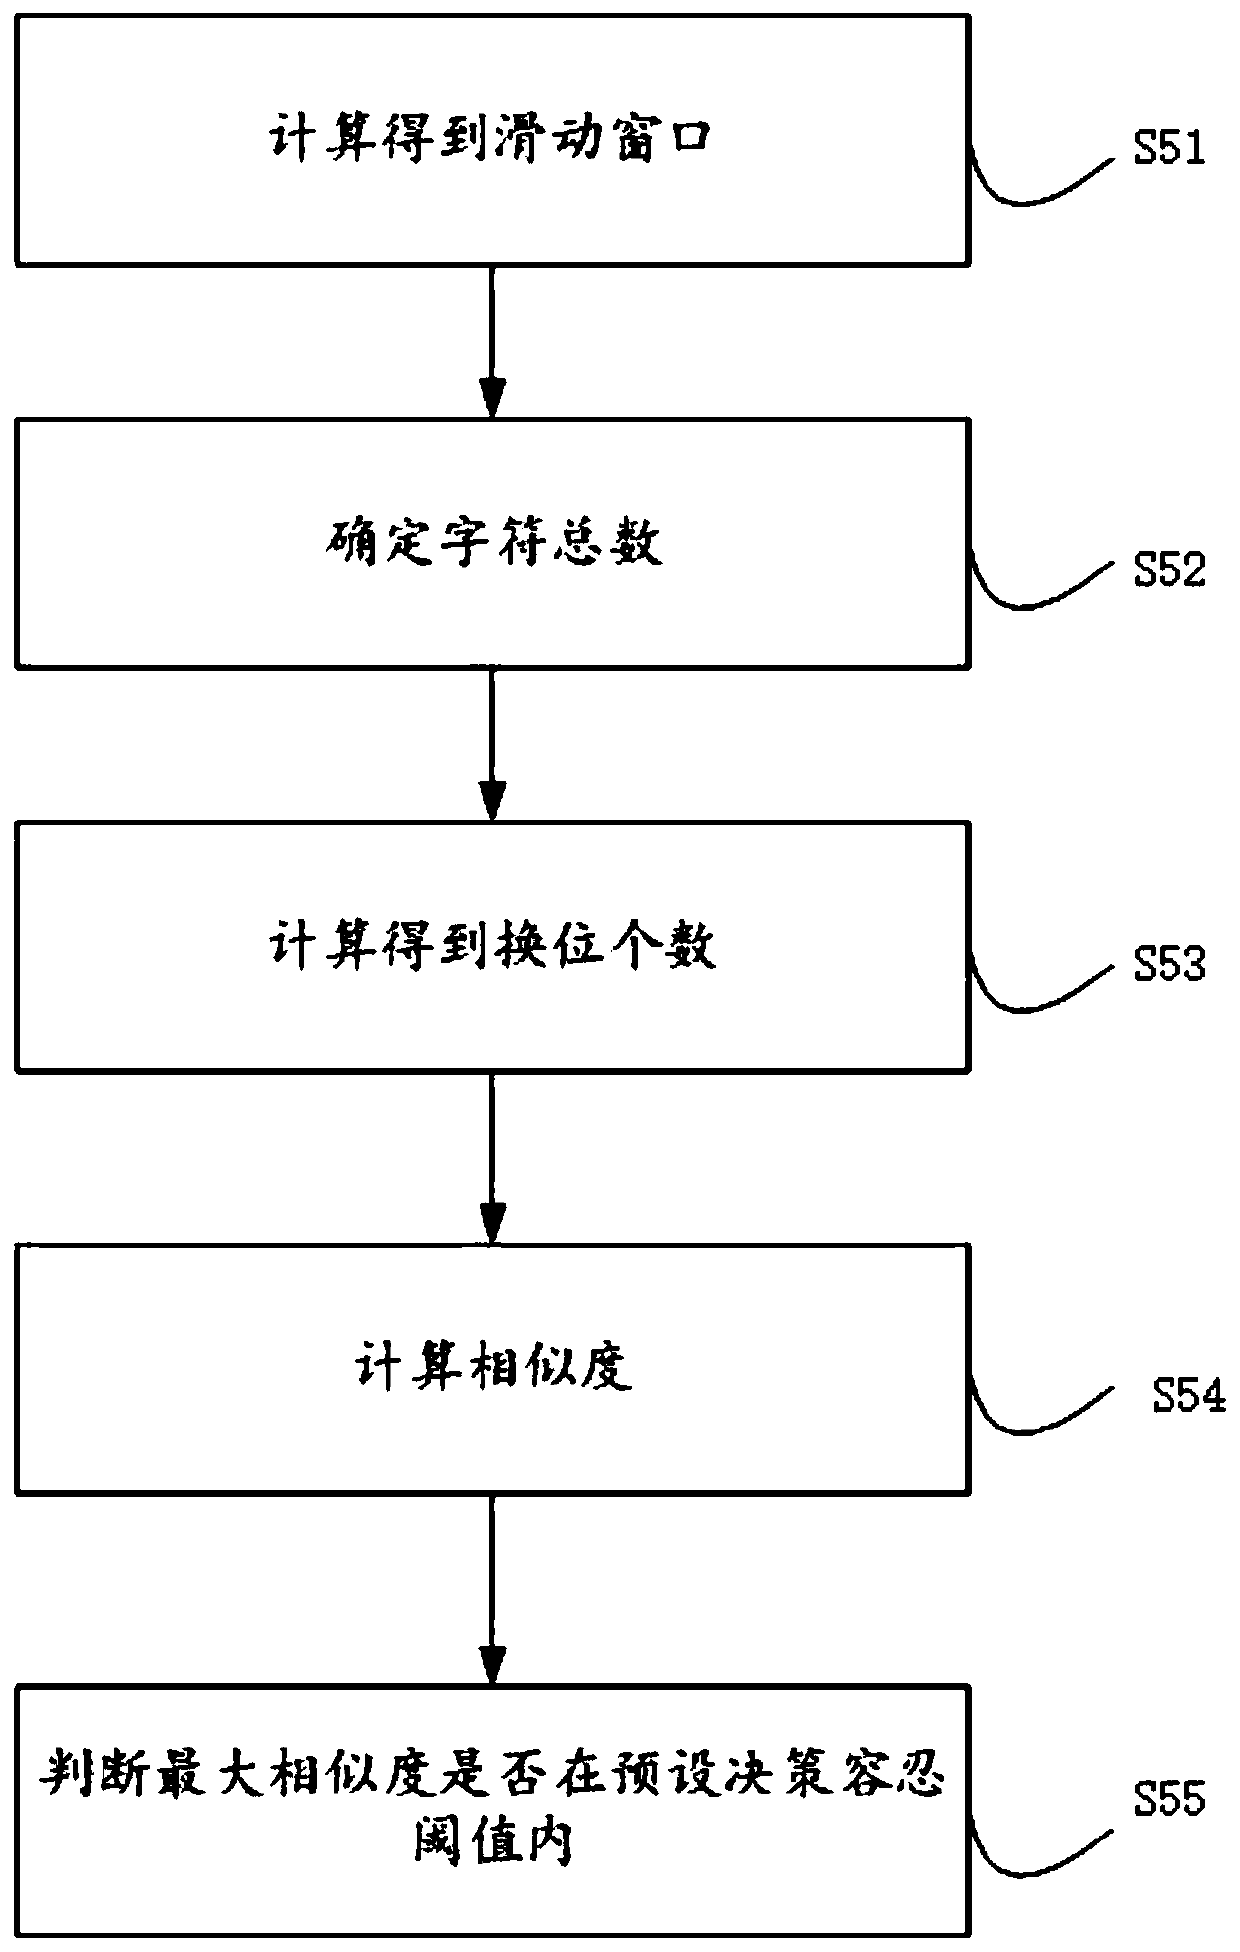 A low-voltage power distribution network district name similarity matching method and system